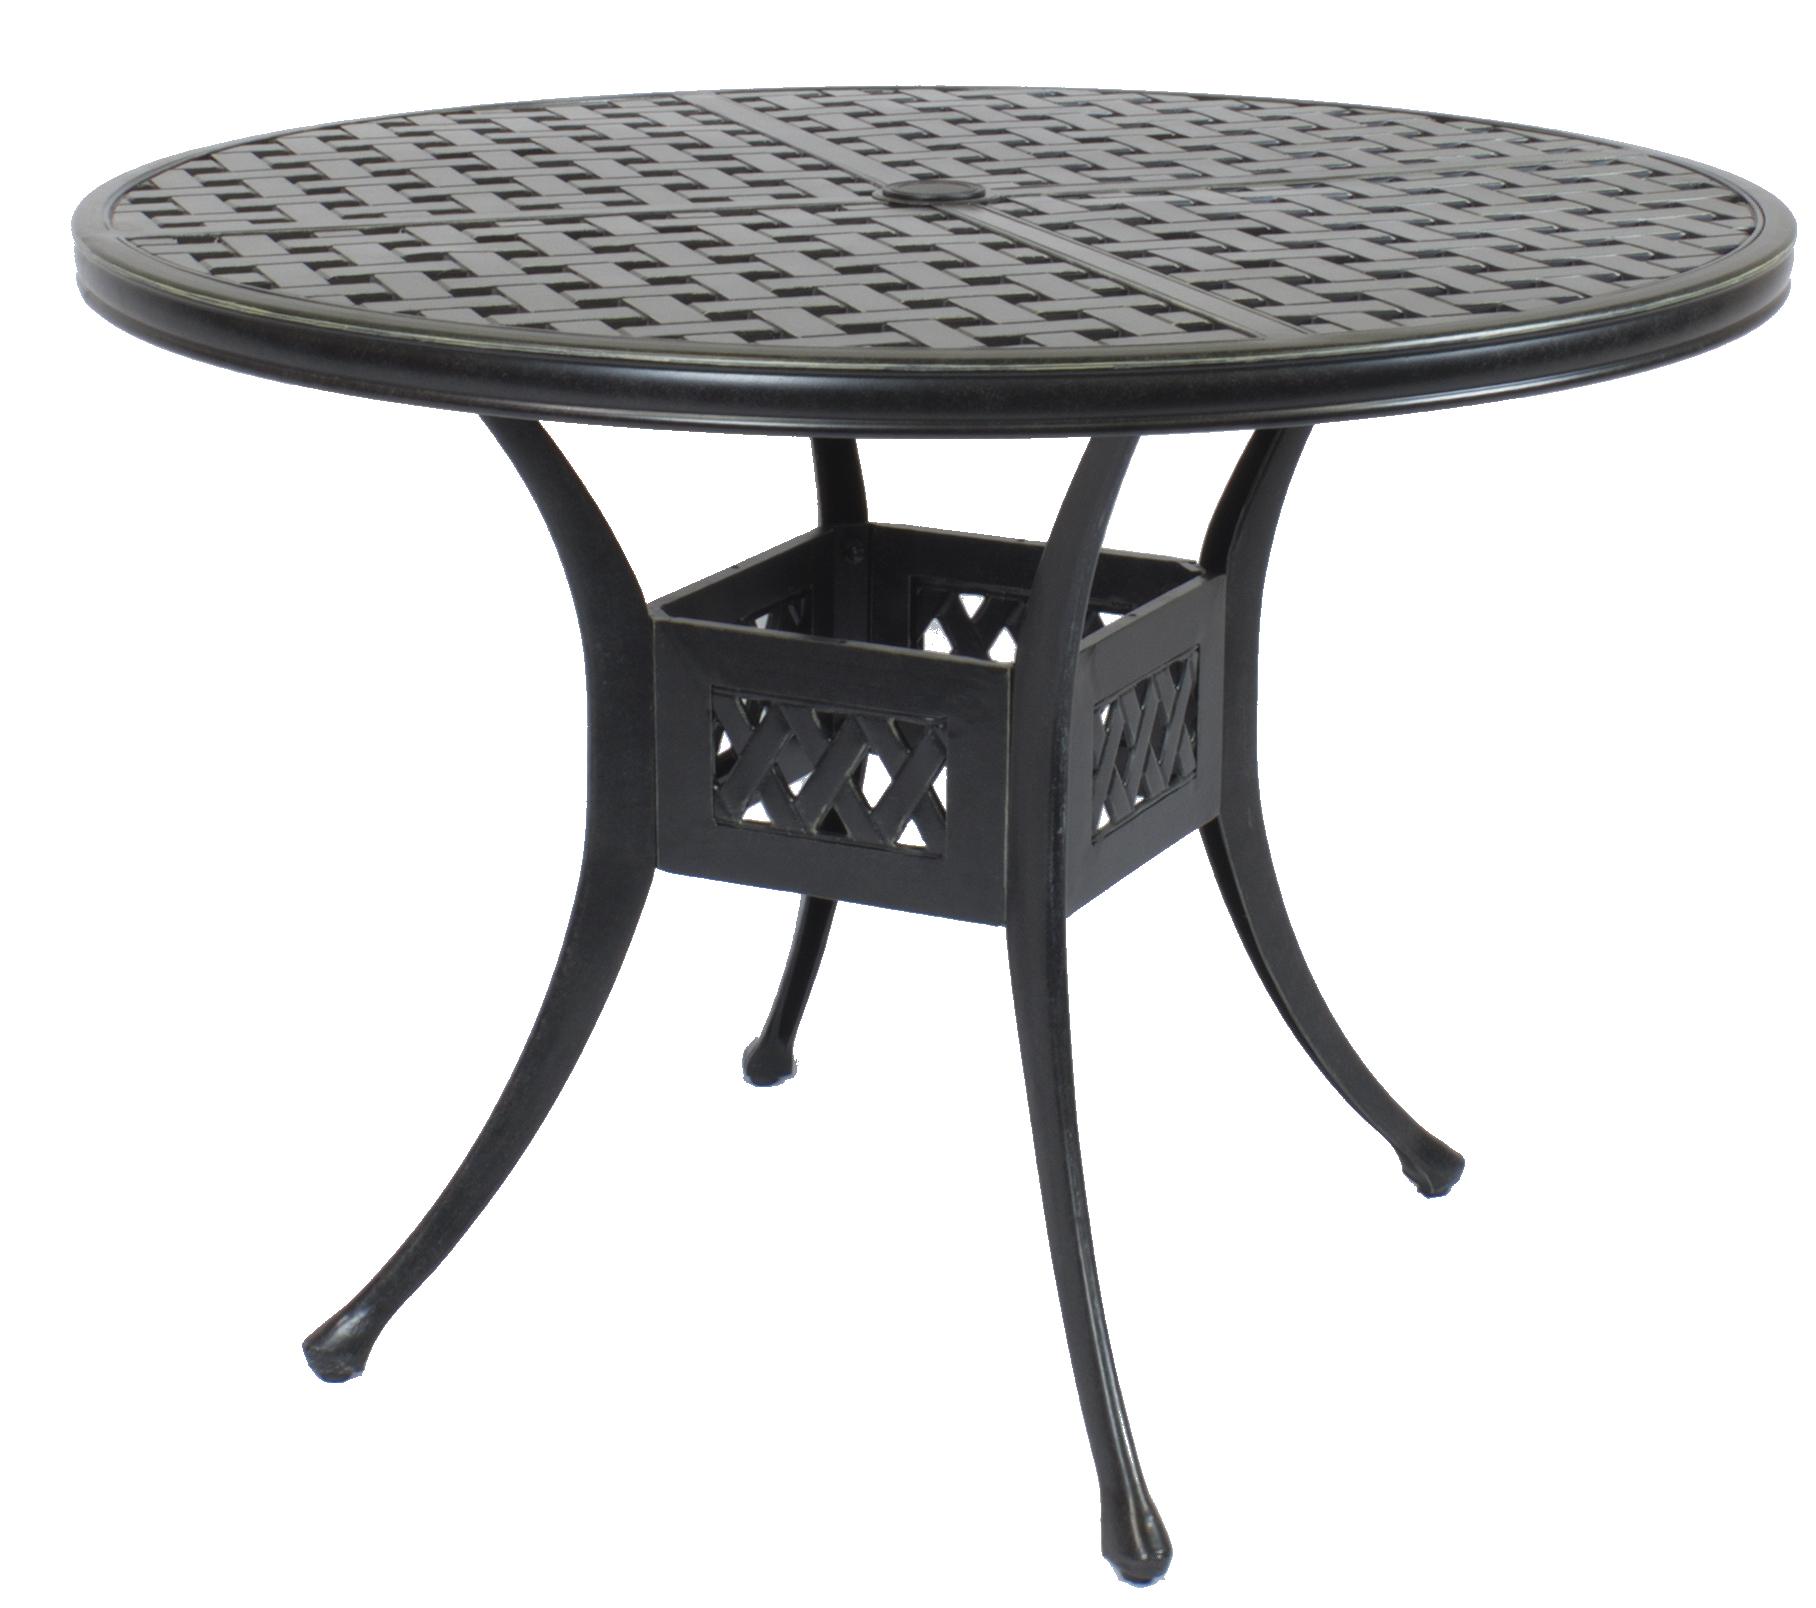 

    
St. Tropez Cast Alumnium Fully Welded 42" Round Dining Table by CaliPatio
